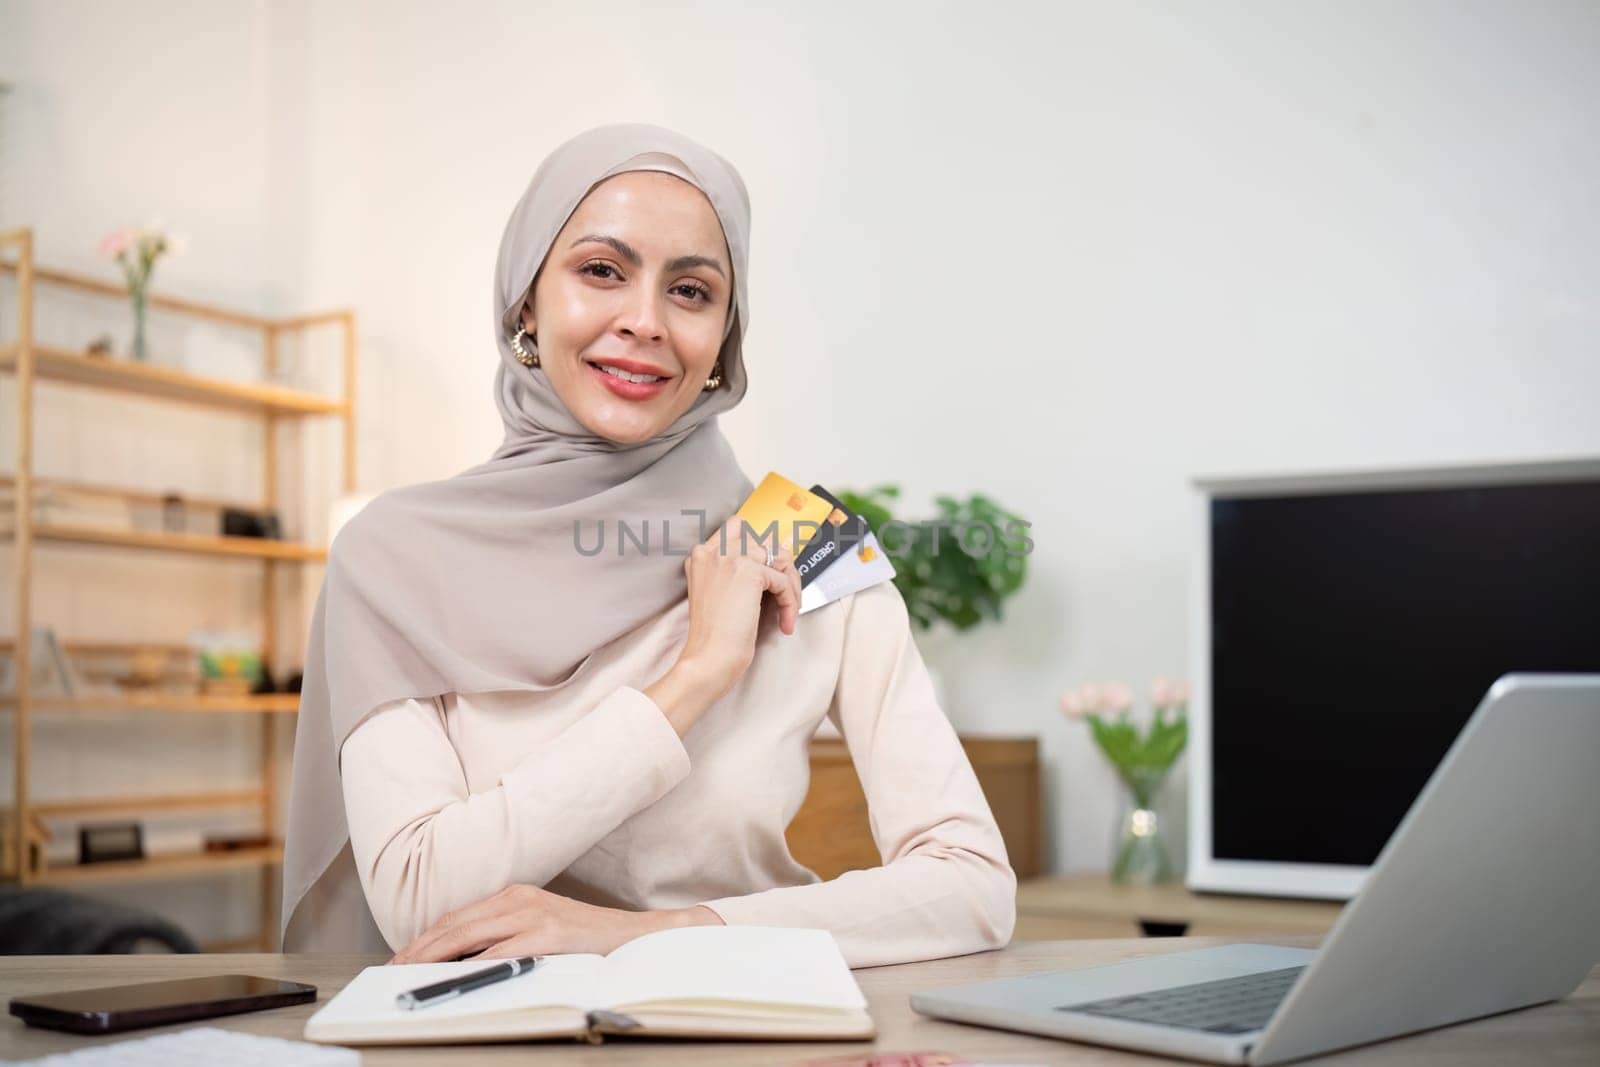 Young woman using laptop at home shopping online. Muslim woman wearing hijab using laptop and holding credit card. Internet banking concept. Muslim woman online shopping.